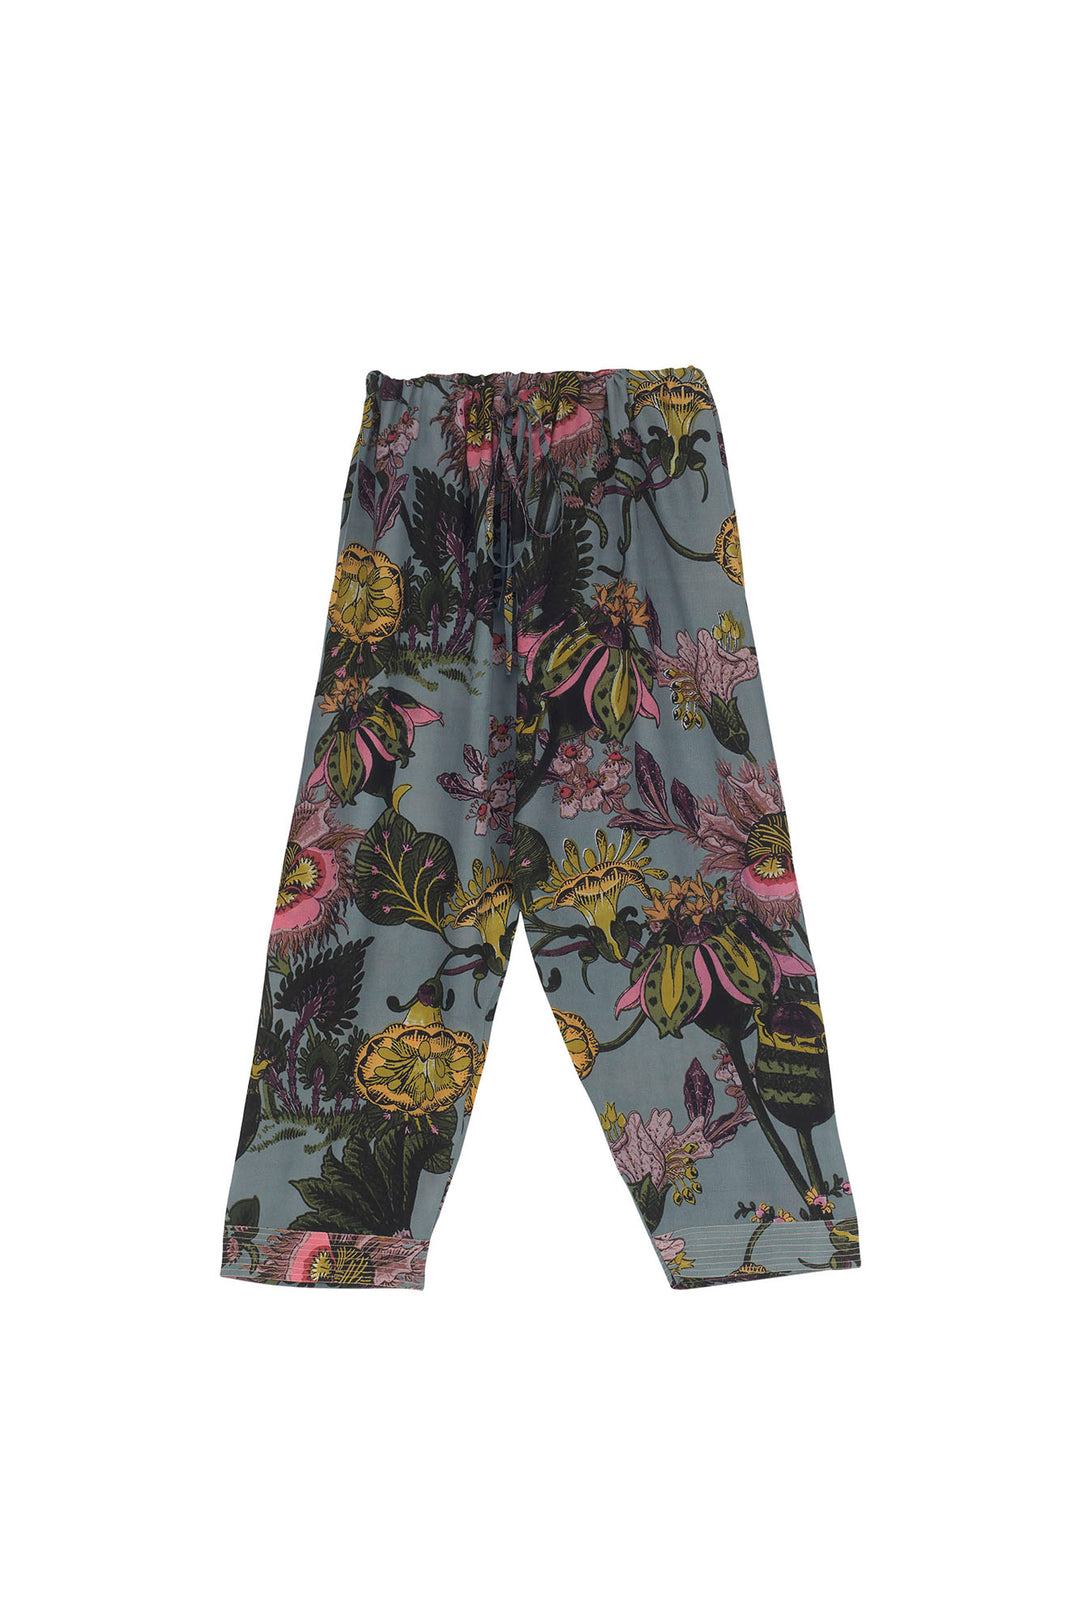 Eccentric Blooms Pewter Lounge Pants - One Hundred Stars